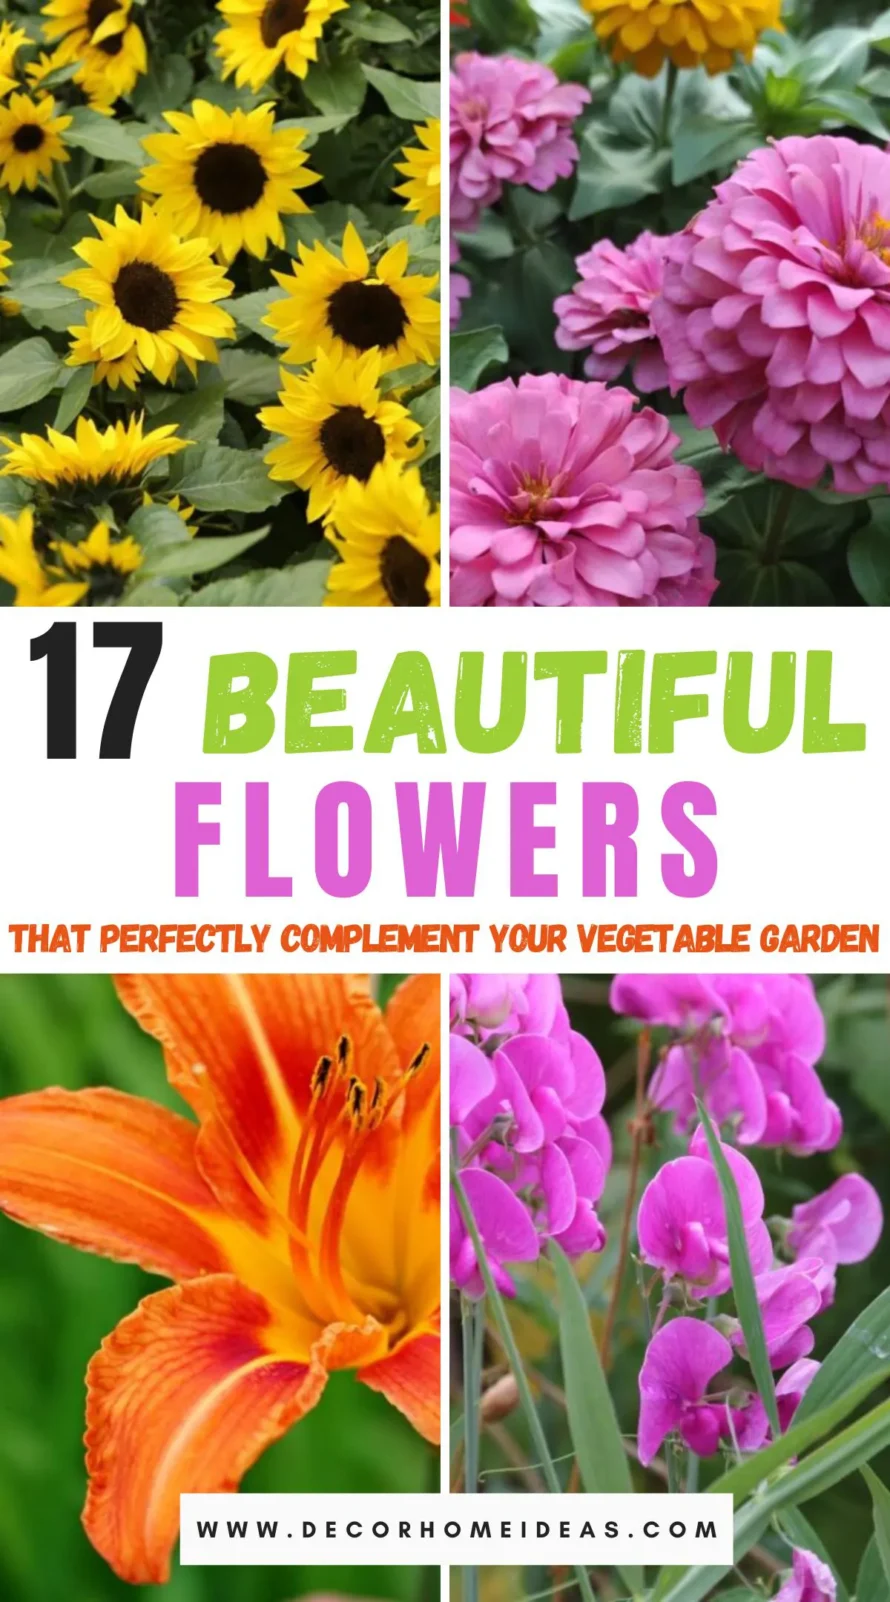 Discover 17 beautiful flowers that not only enhance the aesthetic of your vegetable garden but also promote healthier growth and natural pest control. Learn which blooms can transform your garden into a vibrant and productive oasis.